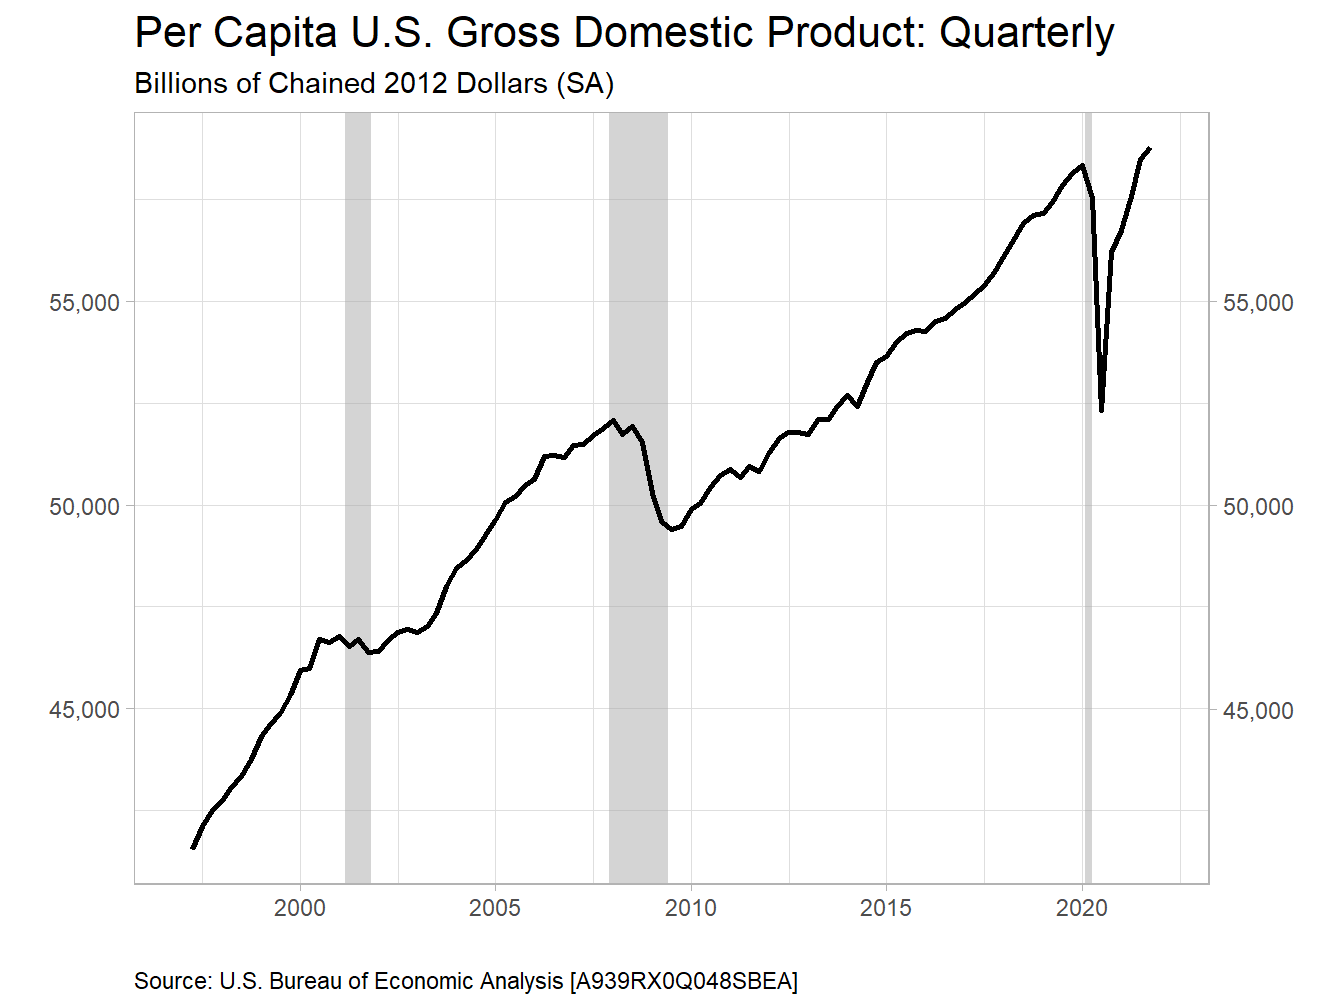 Per Capita GDP Might be More Important